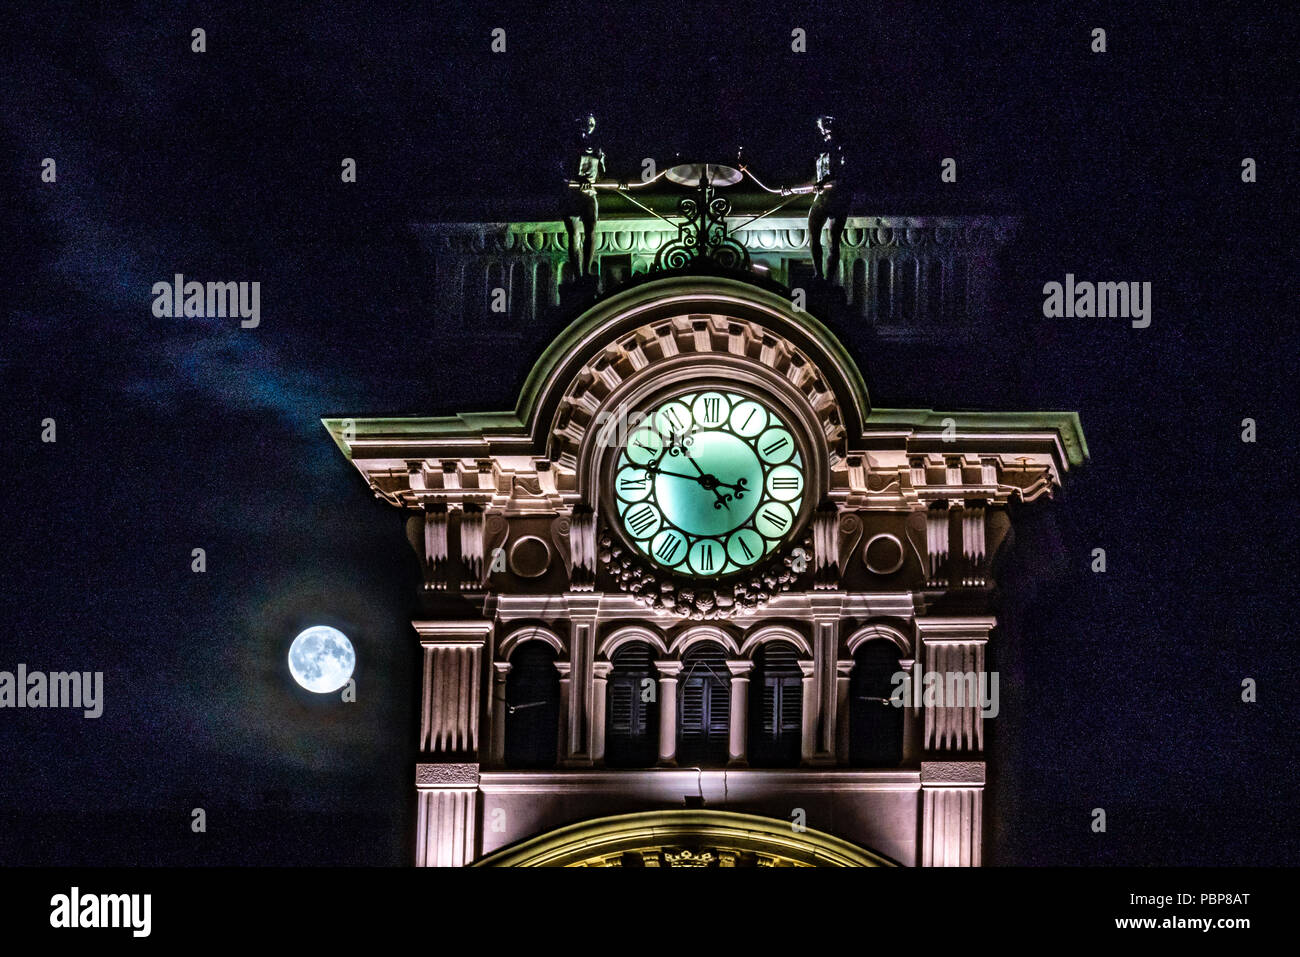 Trieste, Italy, 28 July 2018.  The full moon appears from the clouds behind the top of Trieste's City Hall in Piazza Unità d'Italia. The figures that  Stock Photo